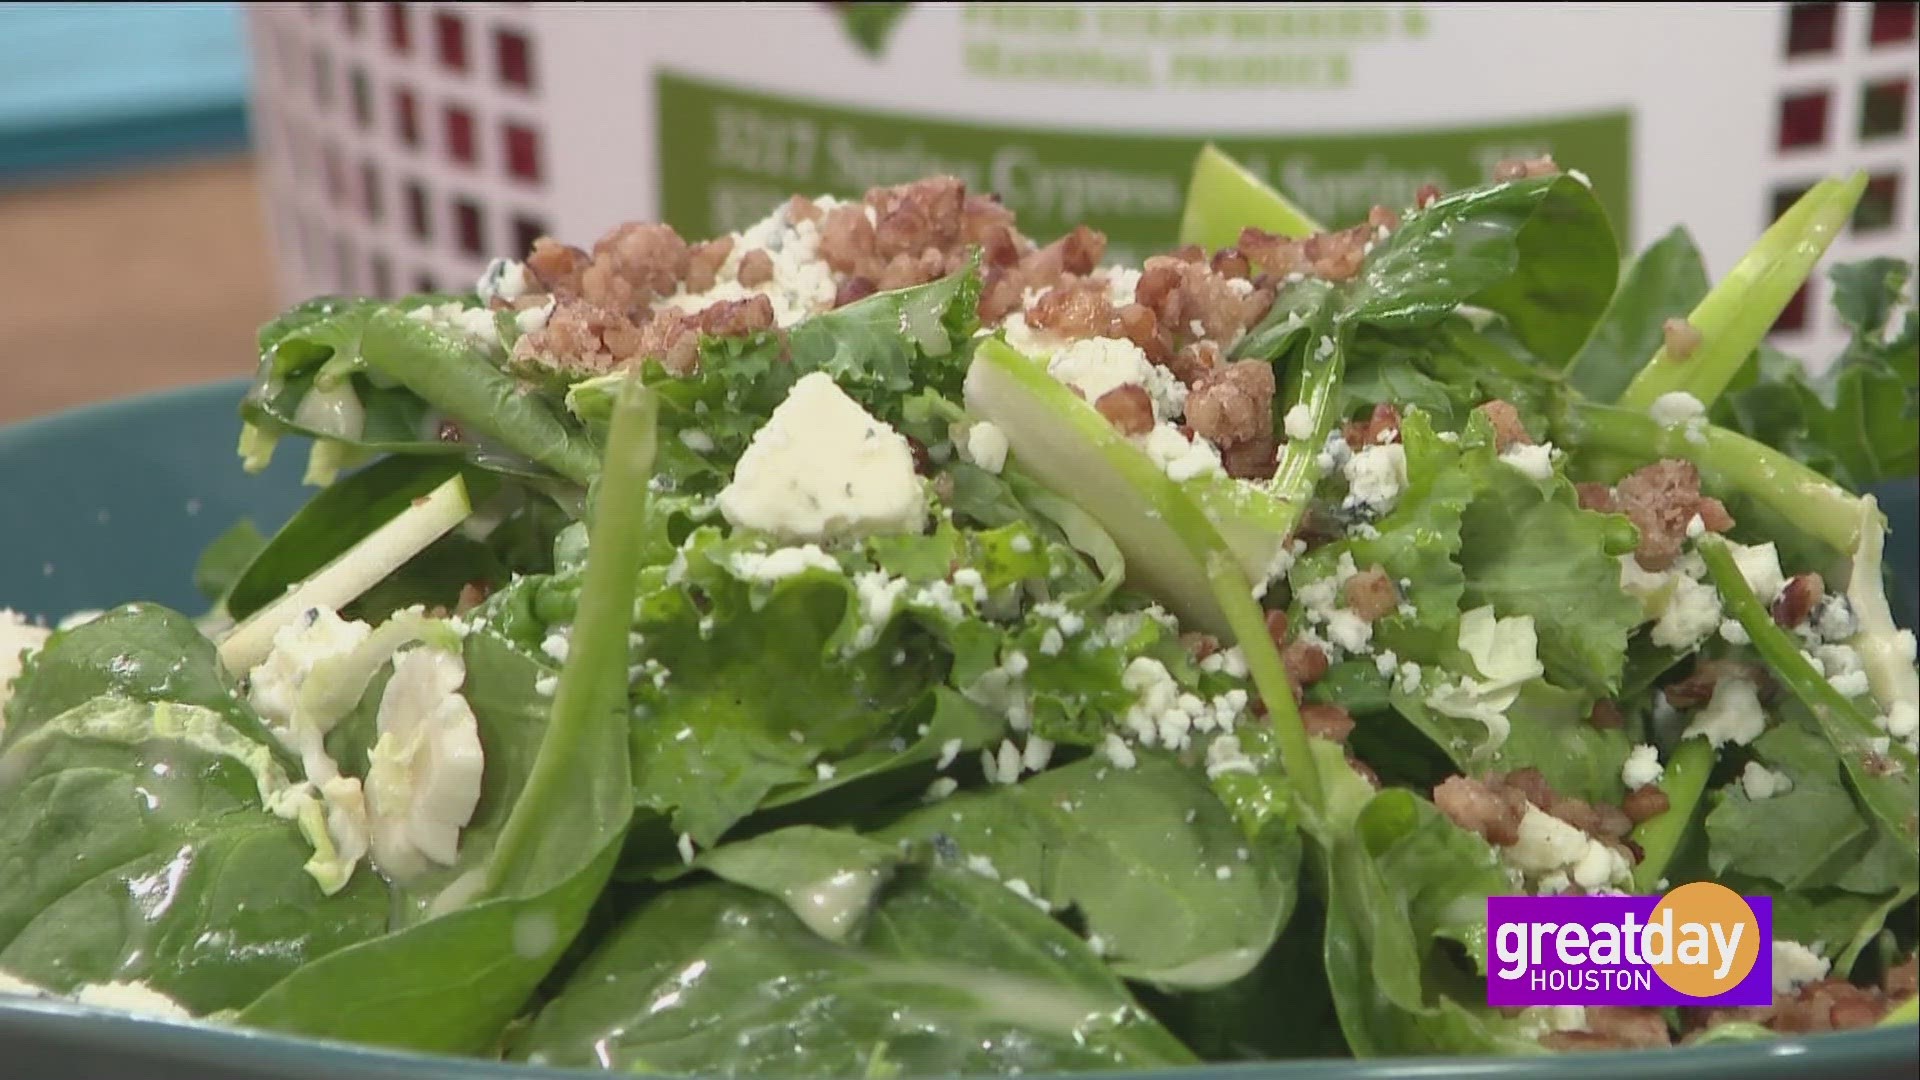 Chef Brandi Key with Daily Gather and Dish Society shares how to make salads you actually look forward to eating.